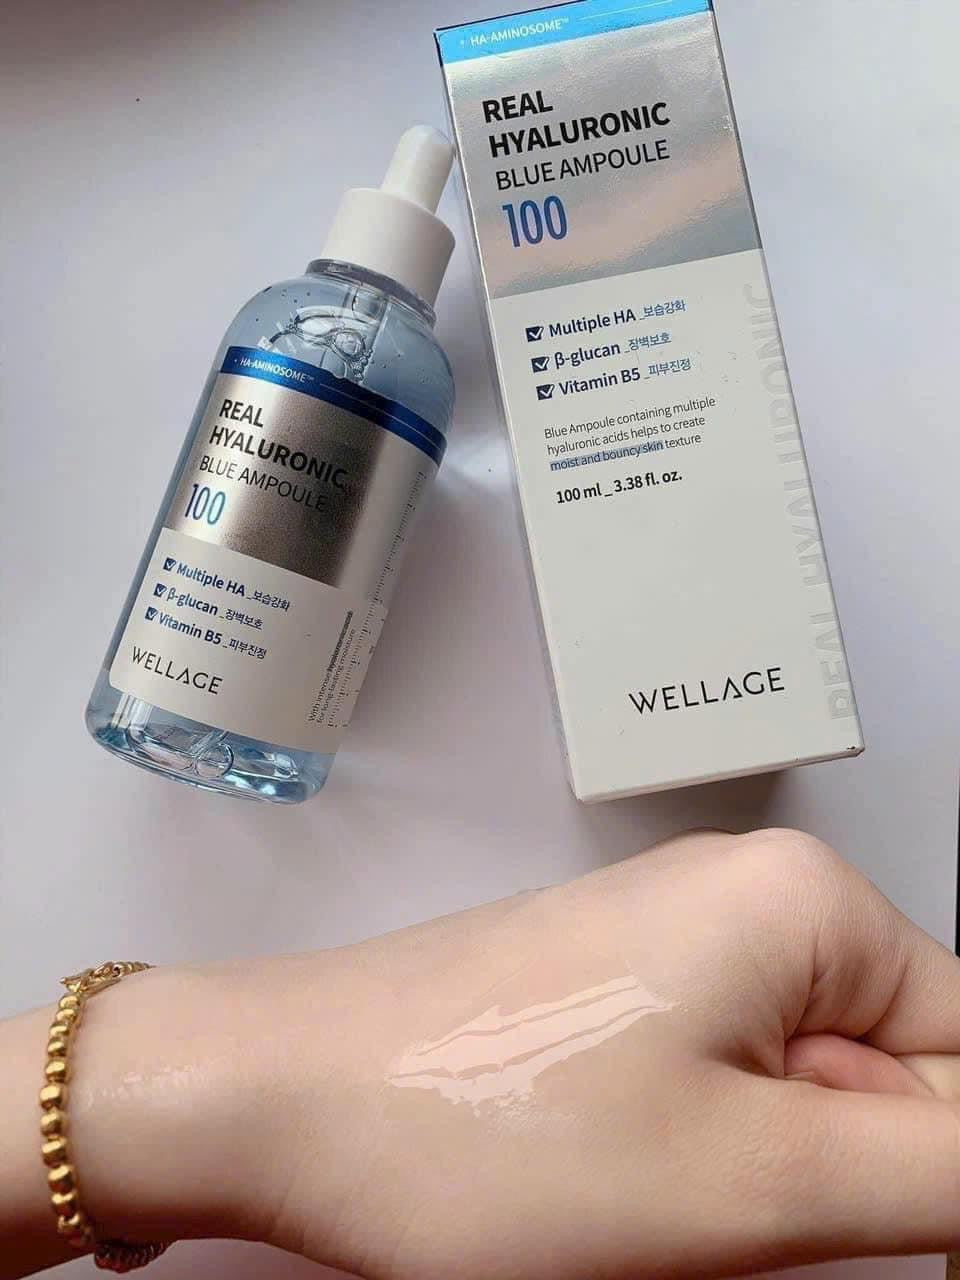 [Wellage] Real Hyaluronic Blue ampoule 100 100ml